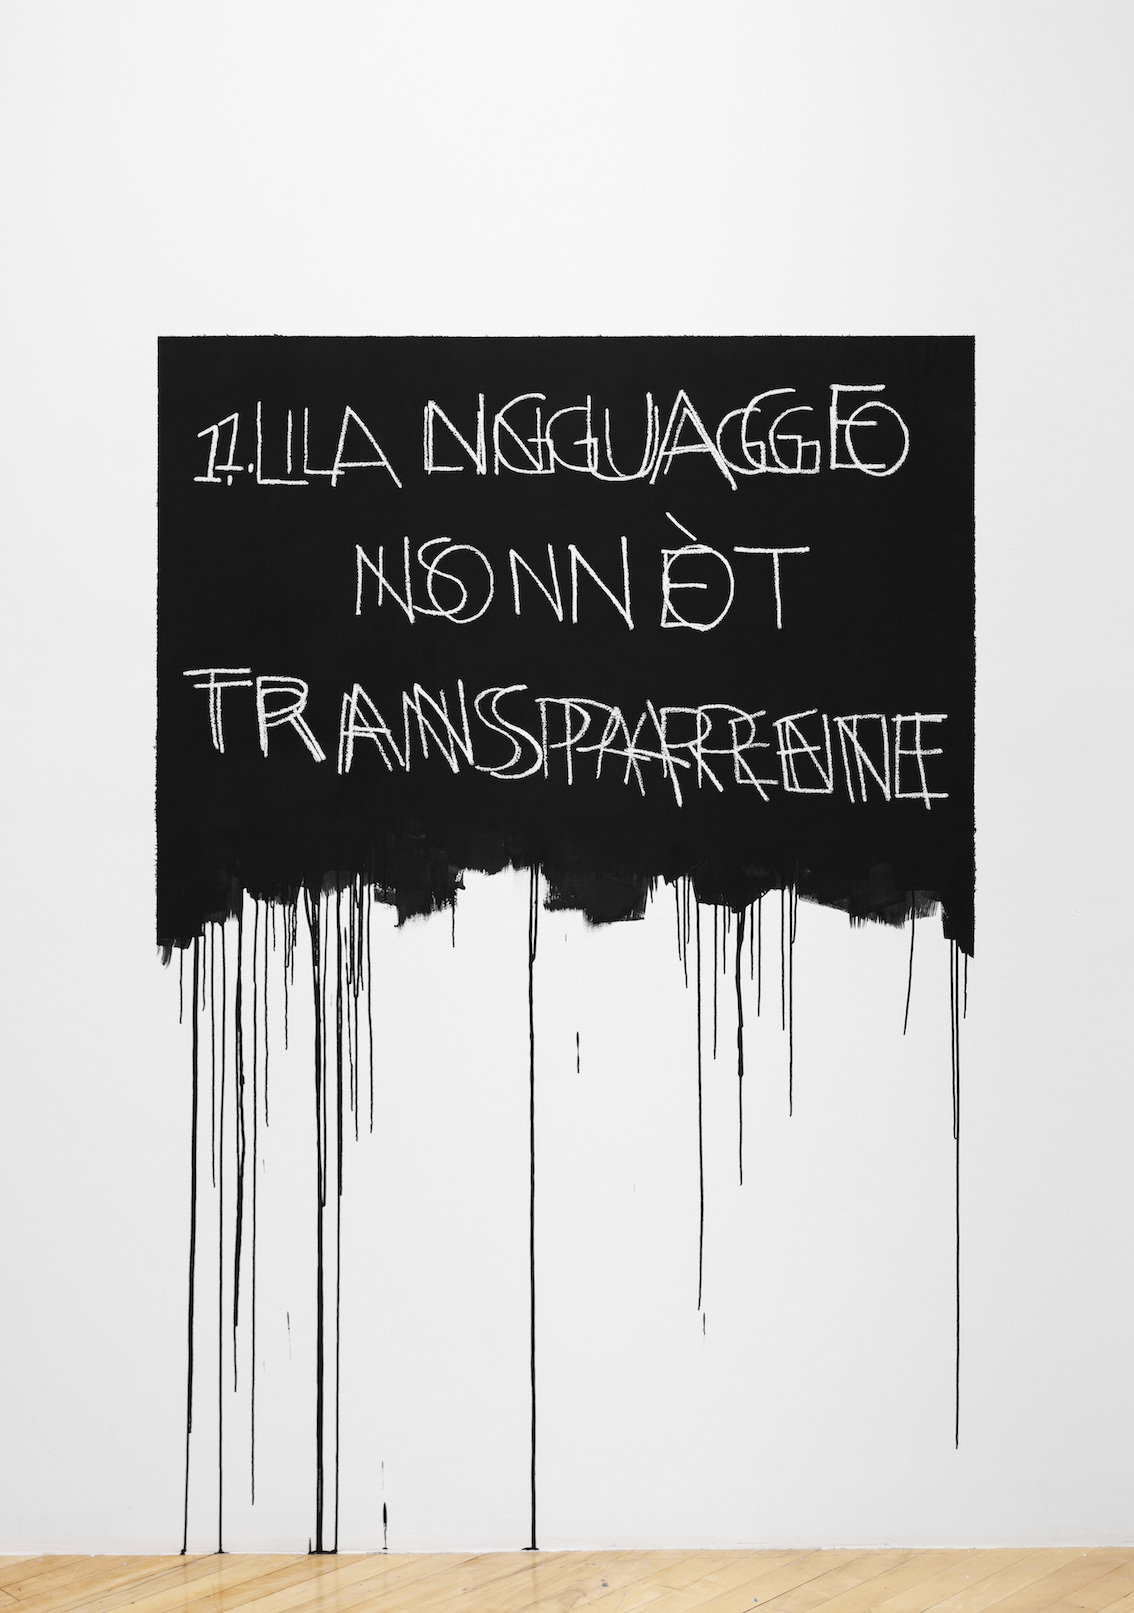 Mel Bochner, Language Is Not Transparent (Italian / English), 1970/2019, oil pastel and acrylic on wall, 72 x 48 in. (182.9 x 121.9 cm). Courtesy the artist